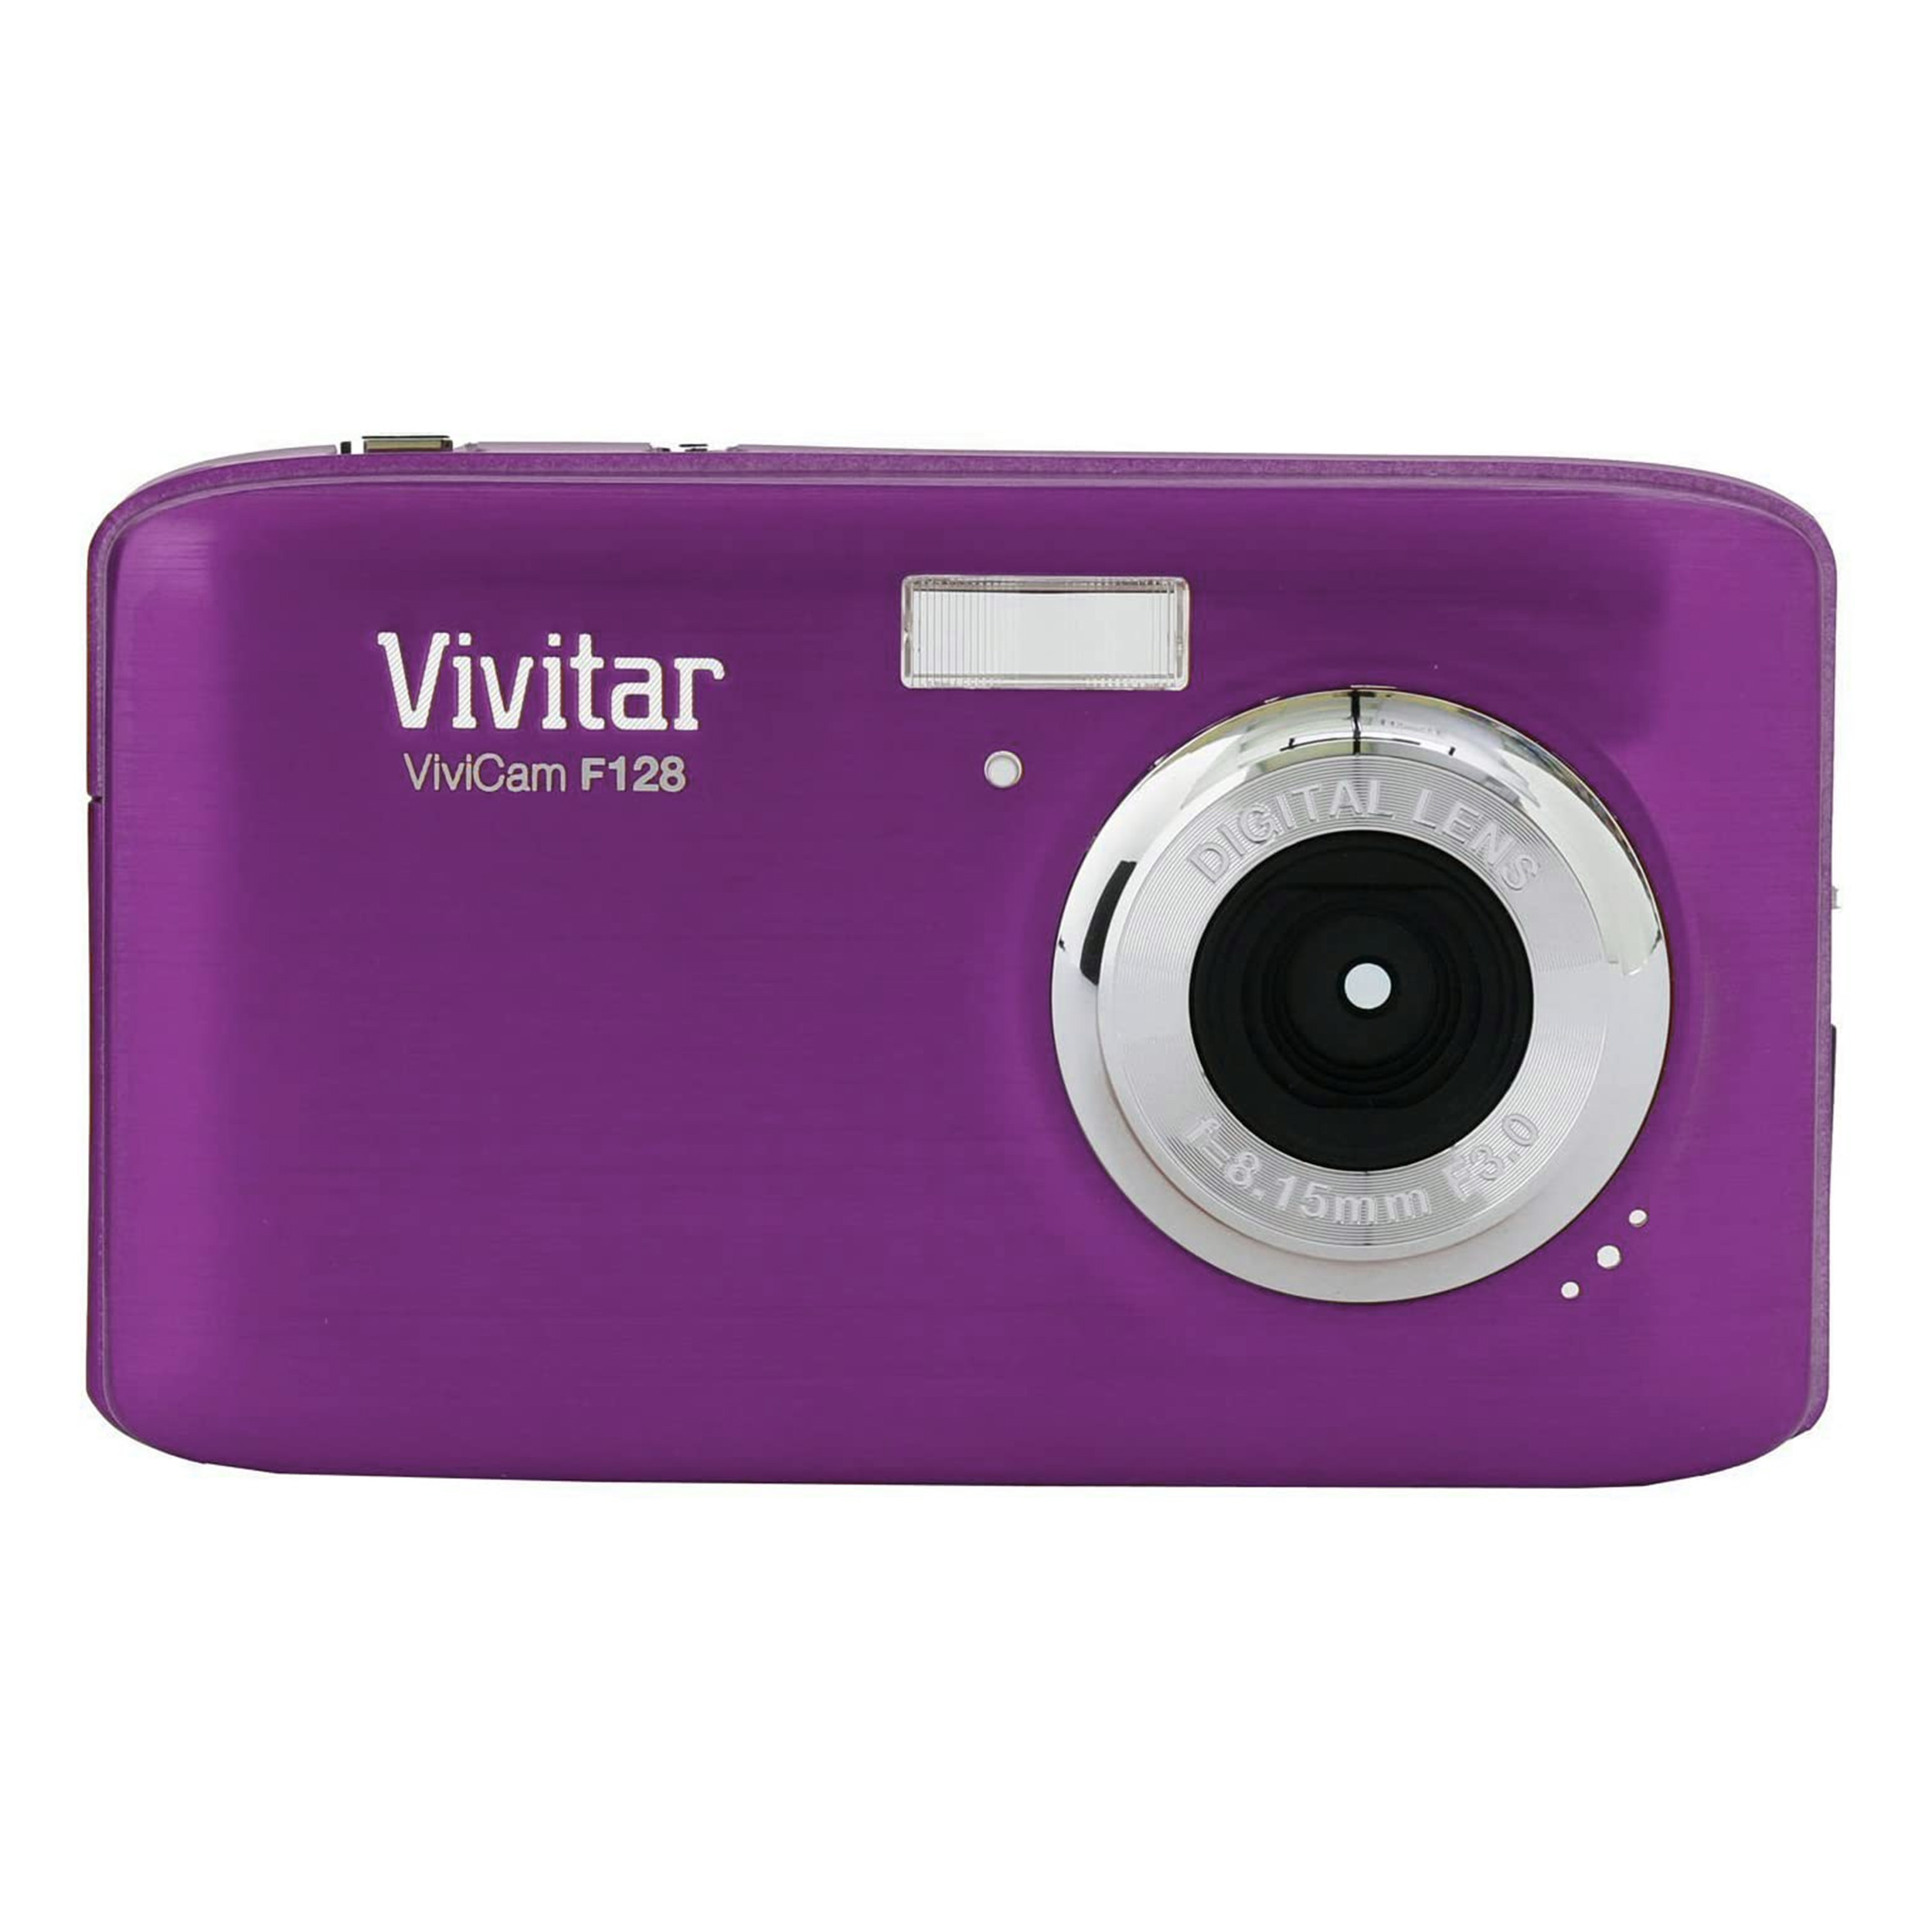 The Vivitar ViviCam F128 Digital Camera is a simple point-and-shoot. 